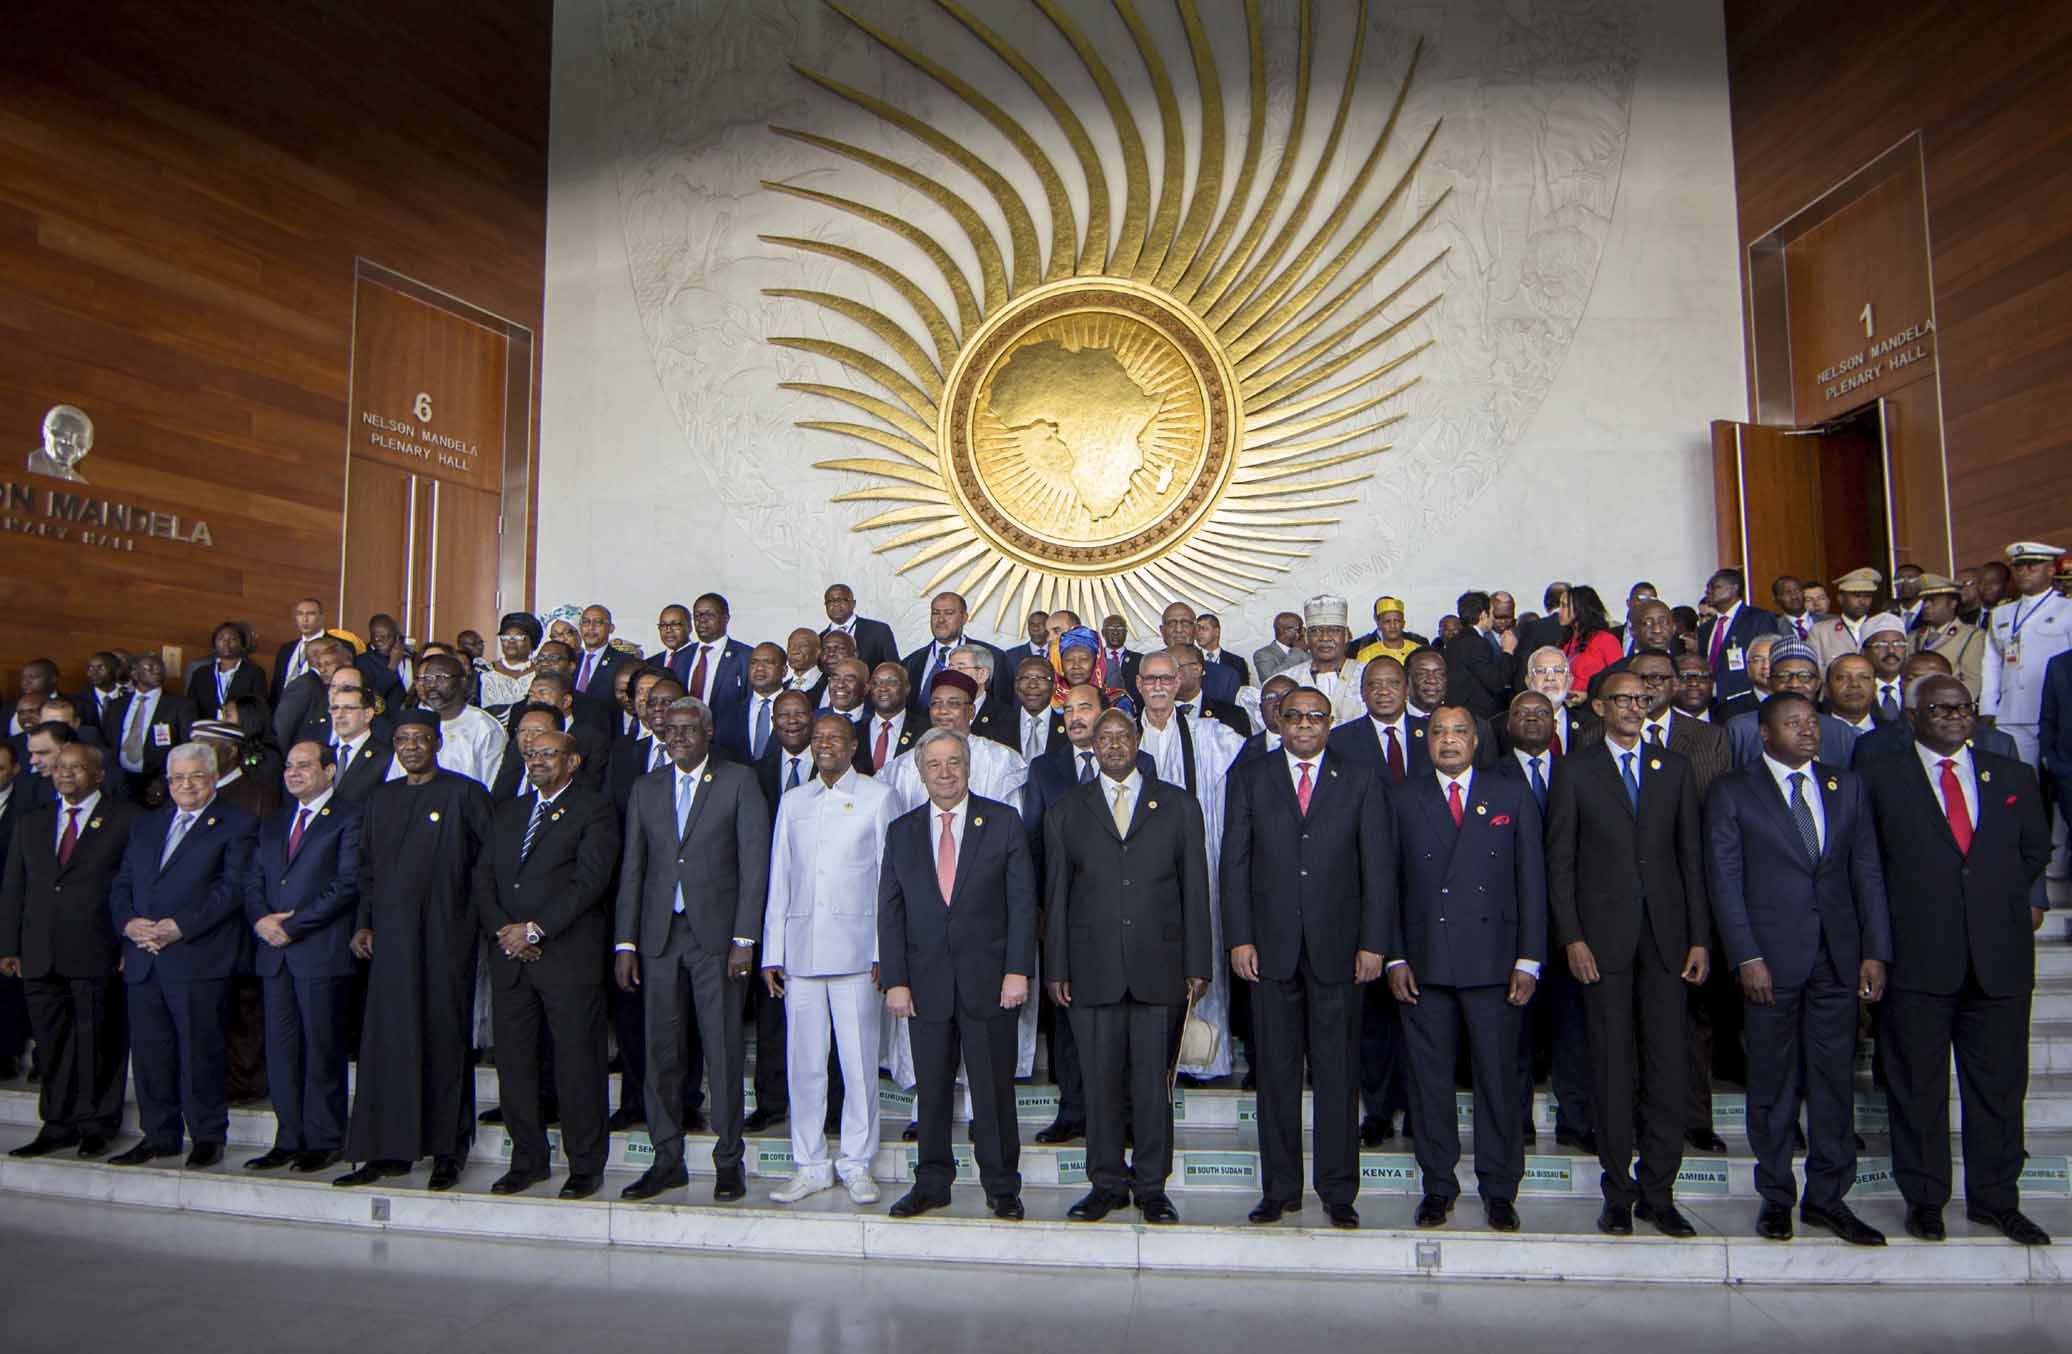 ADDIS ABABA Heads of state pose for a group photograph during the